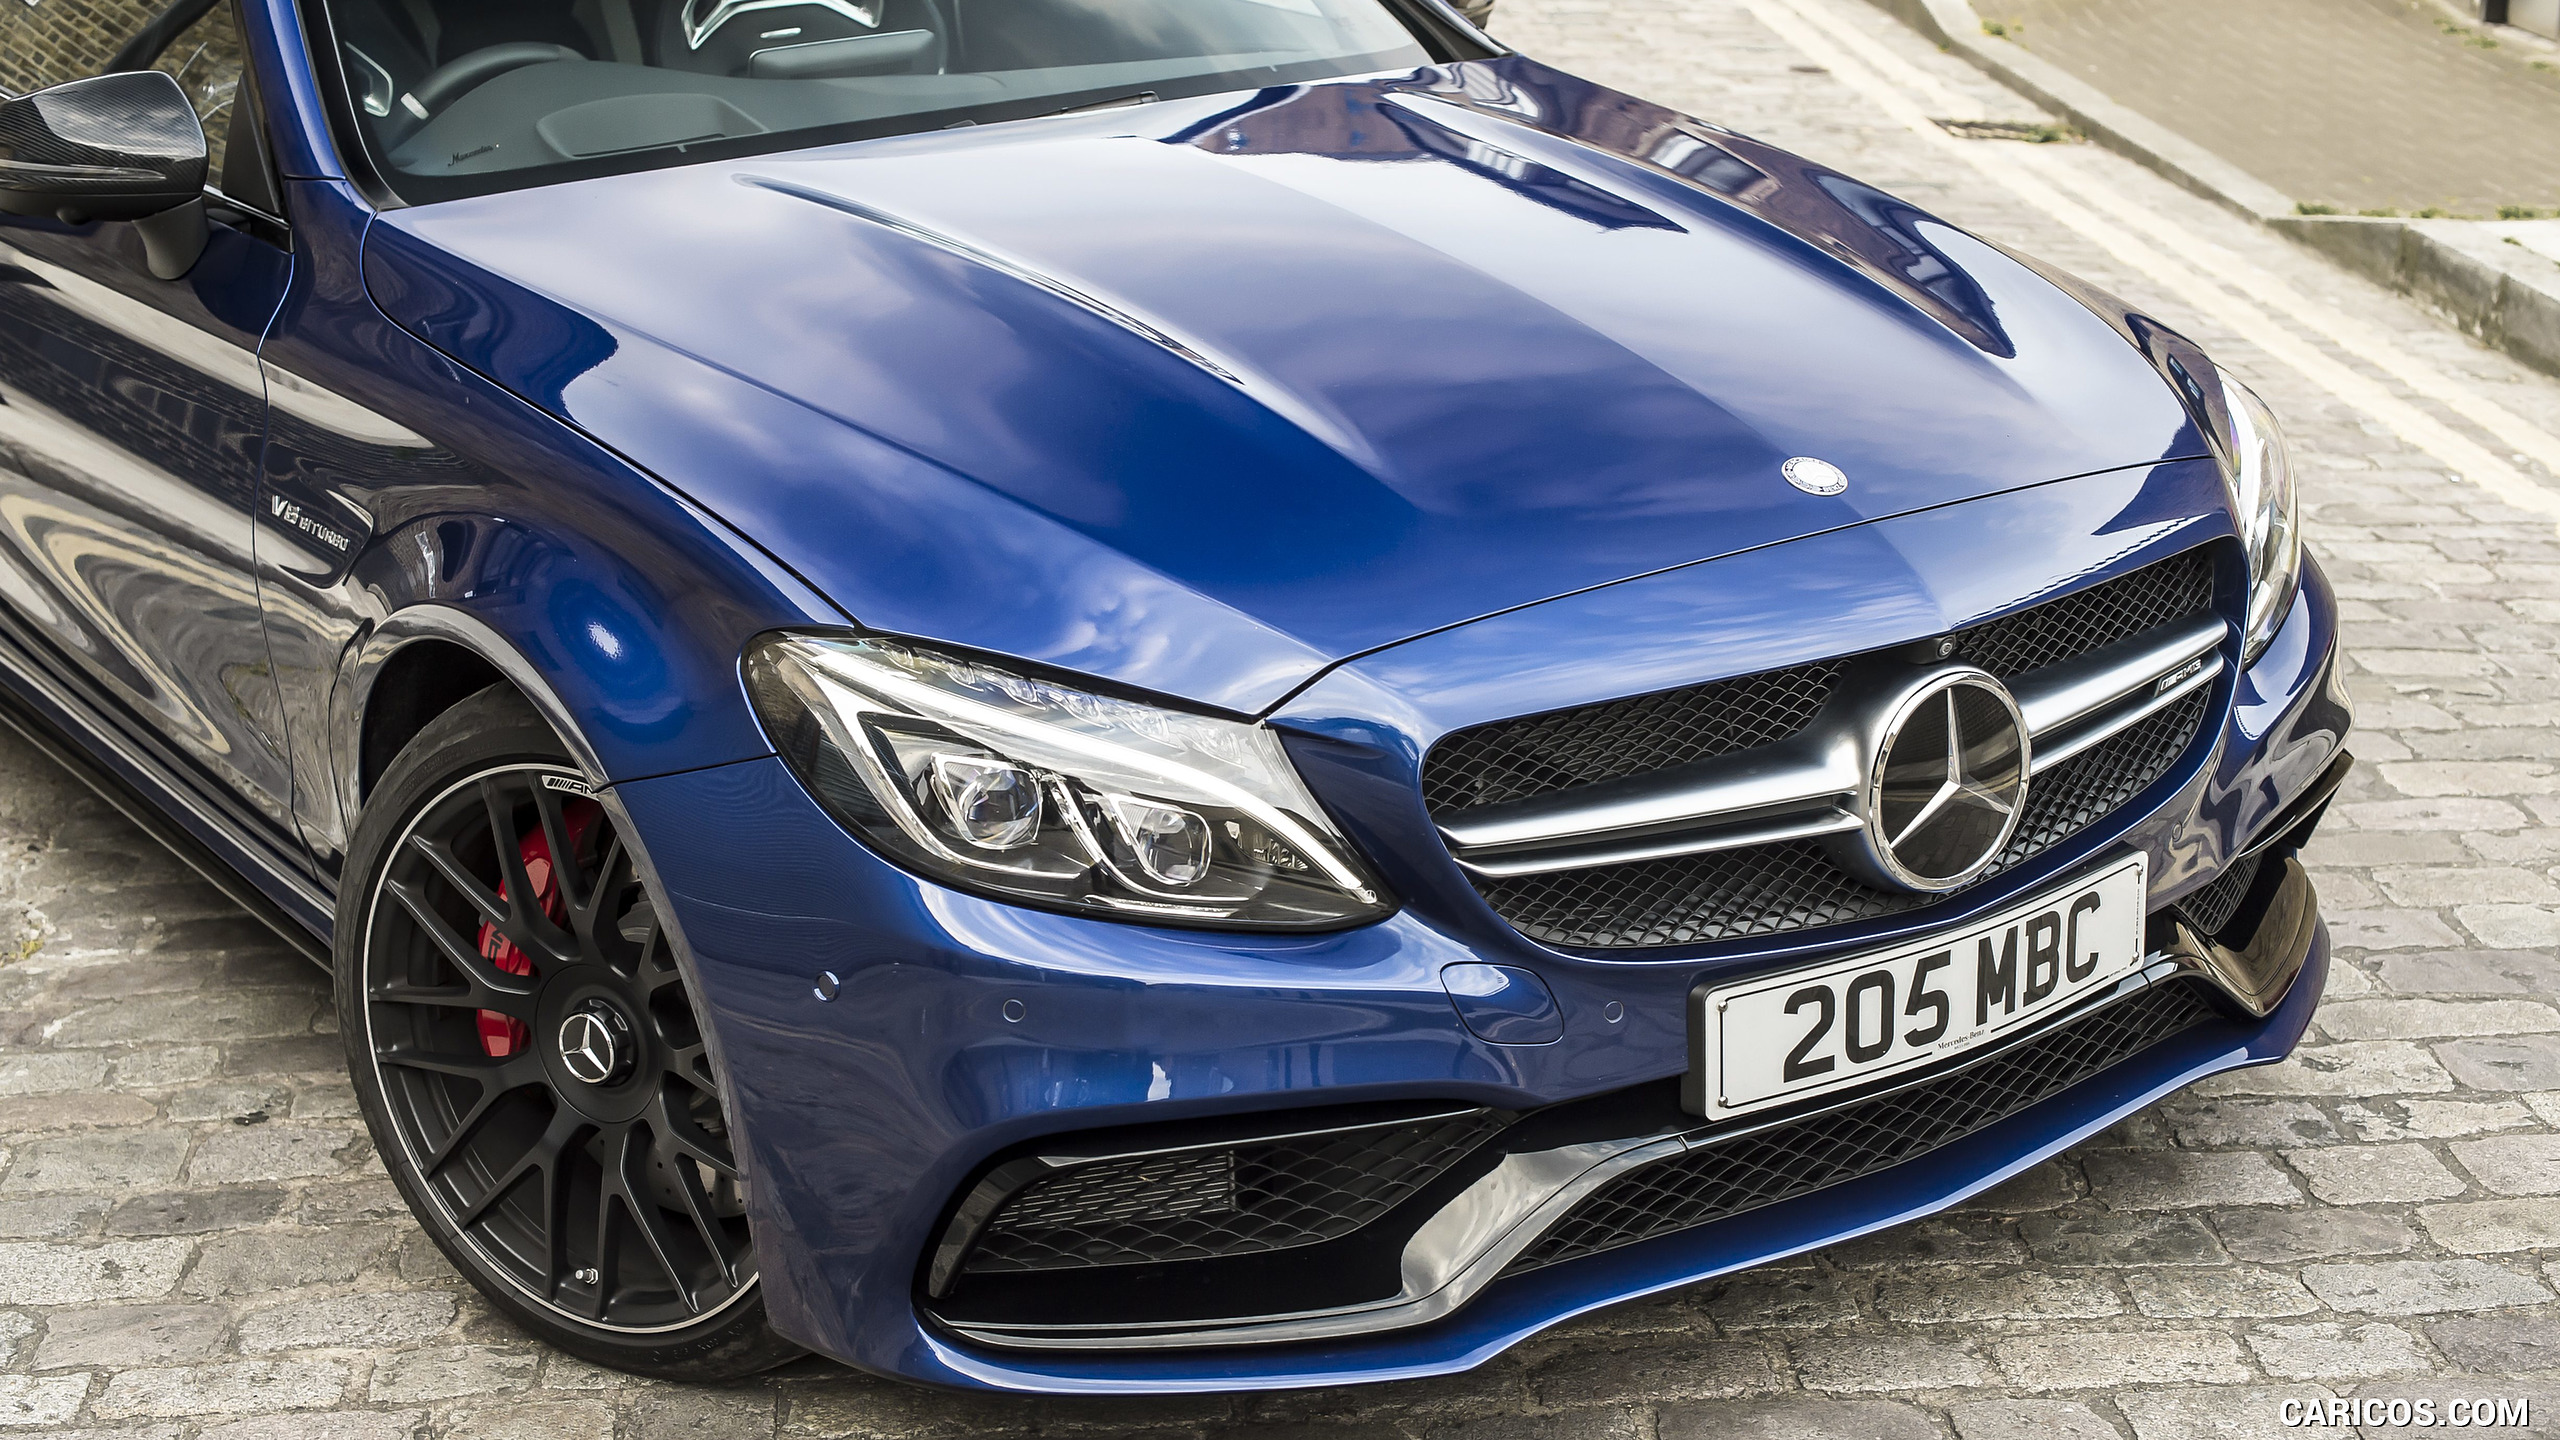 2017 Mercedes-AMG C63 S Coupe (UK-Spec) - Front, #24 of 52